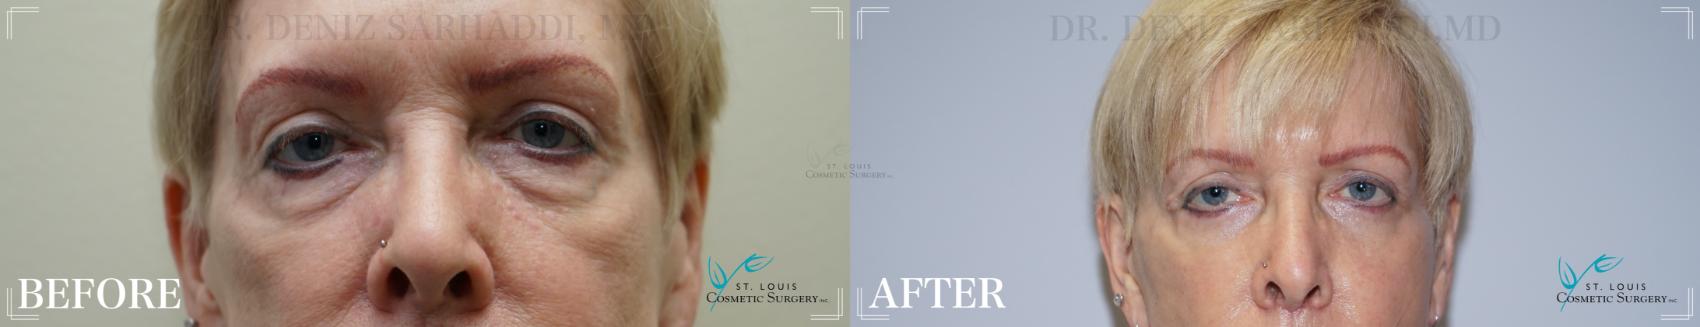 Eyelid Surgery Before & After Photo | St. Louis, MO | St. Louis Cosmetic Surgery